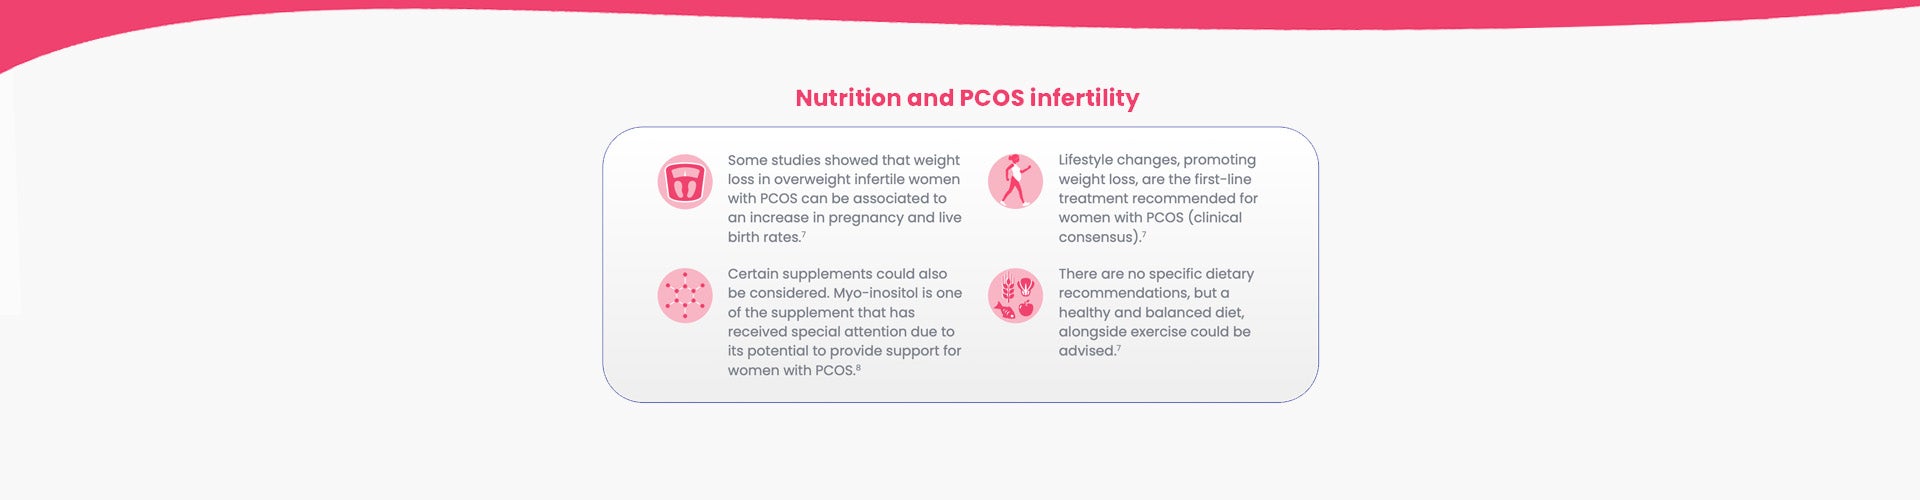 nutrition-and-pcos-infertility